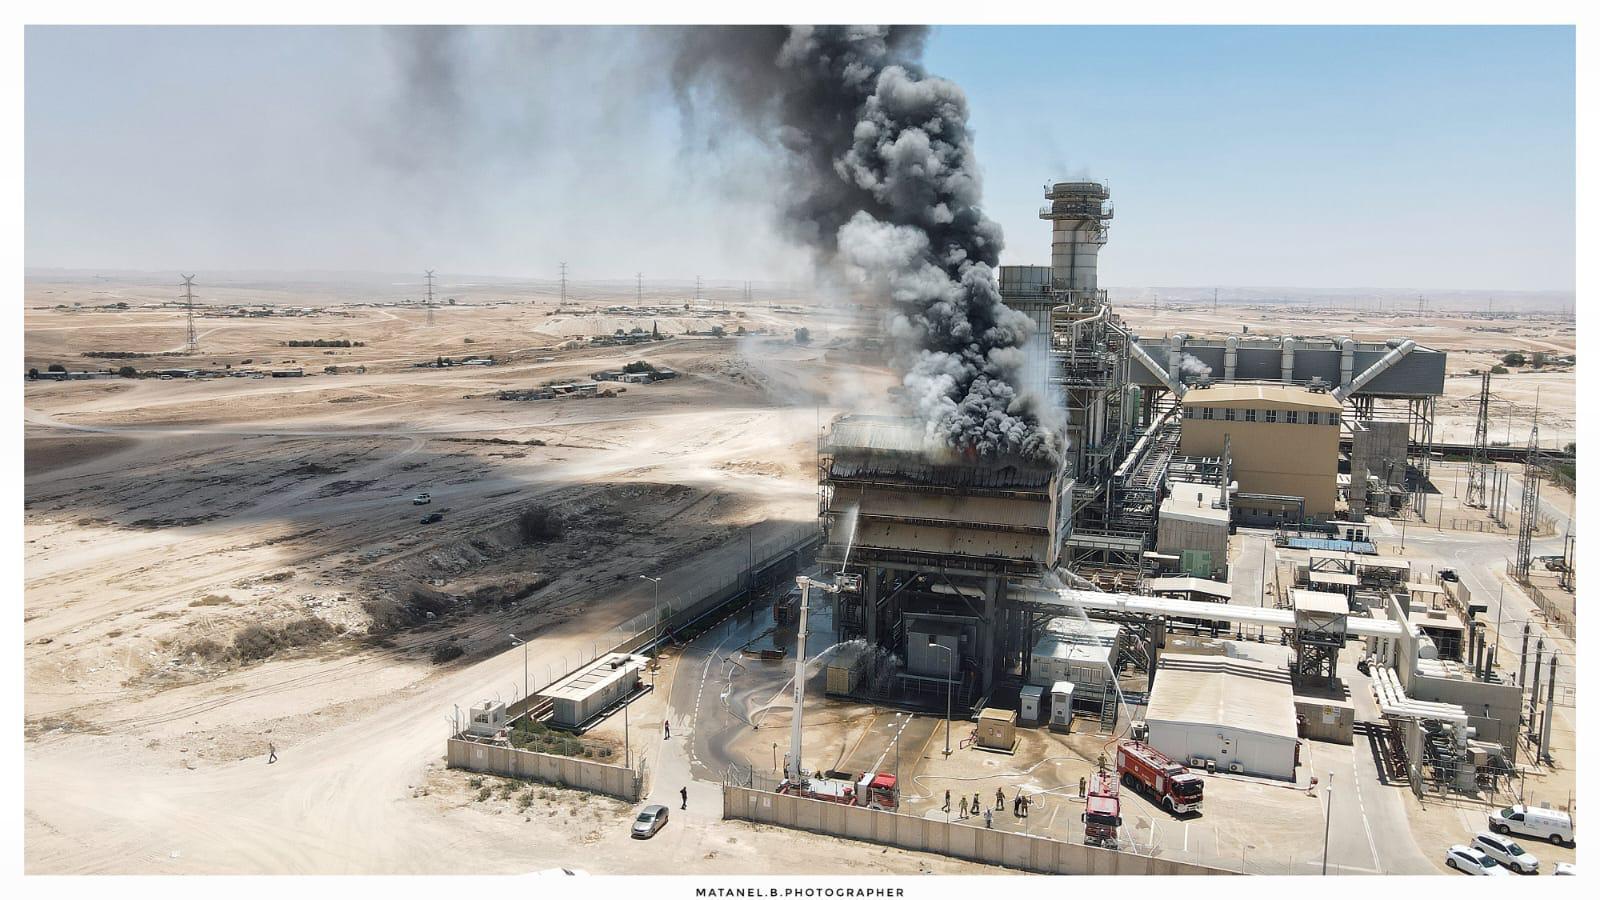 Fire at an Israeli power plant